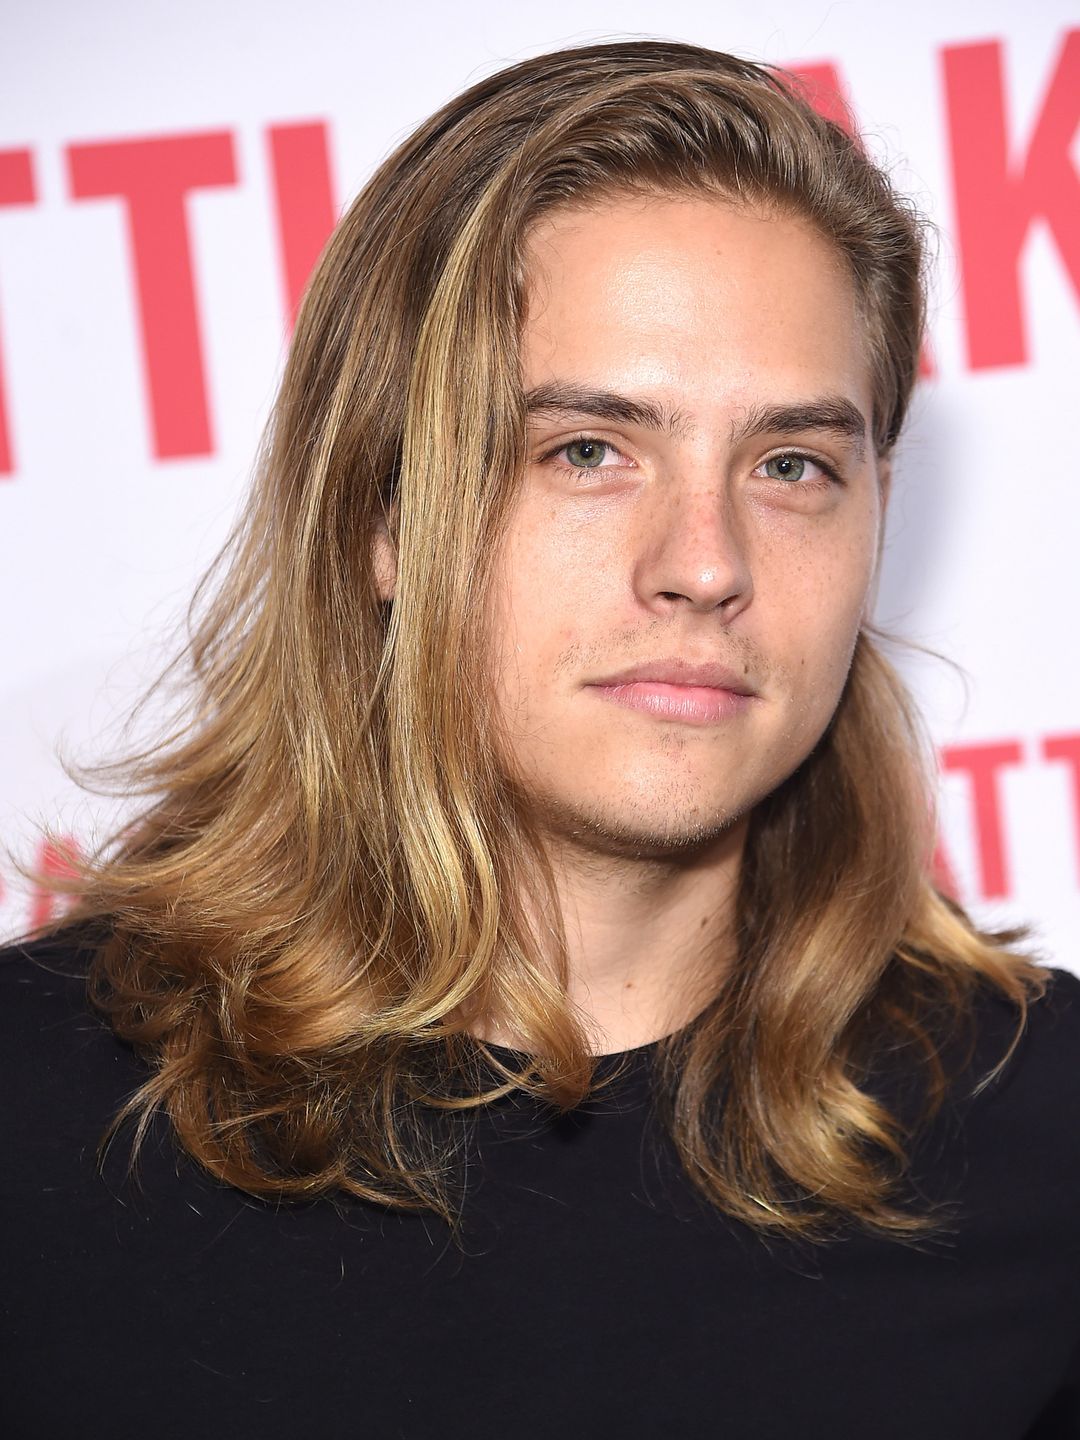 Dylan Sprouse in his teens